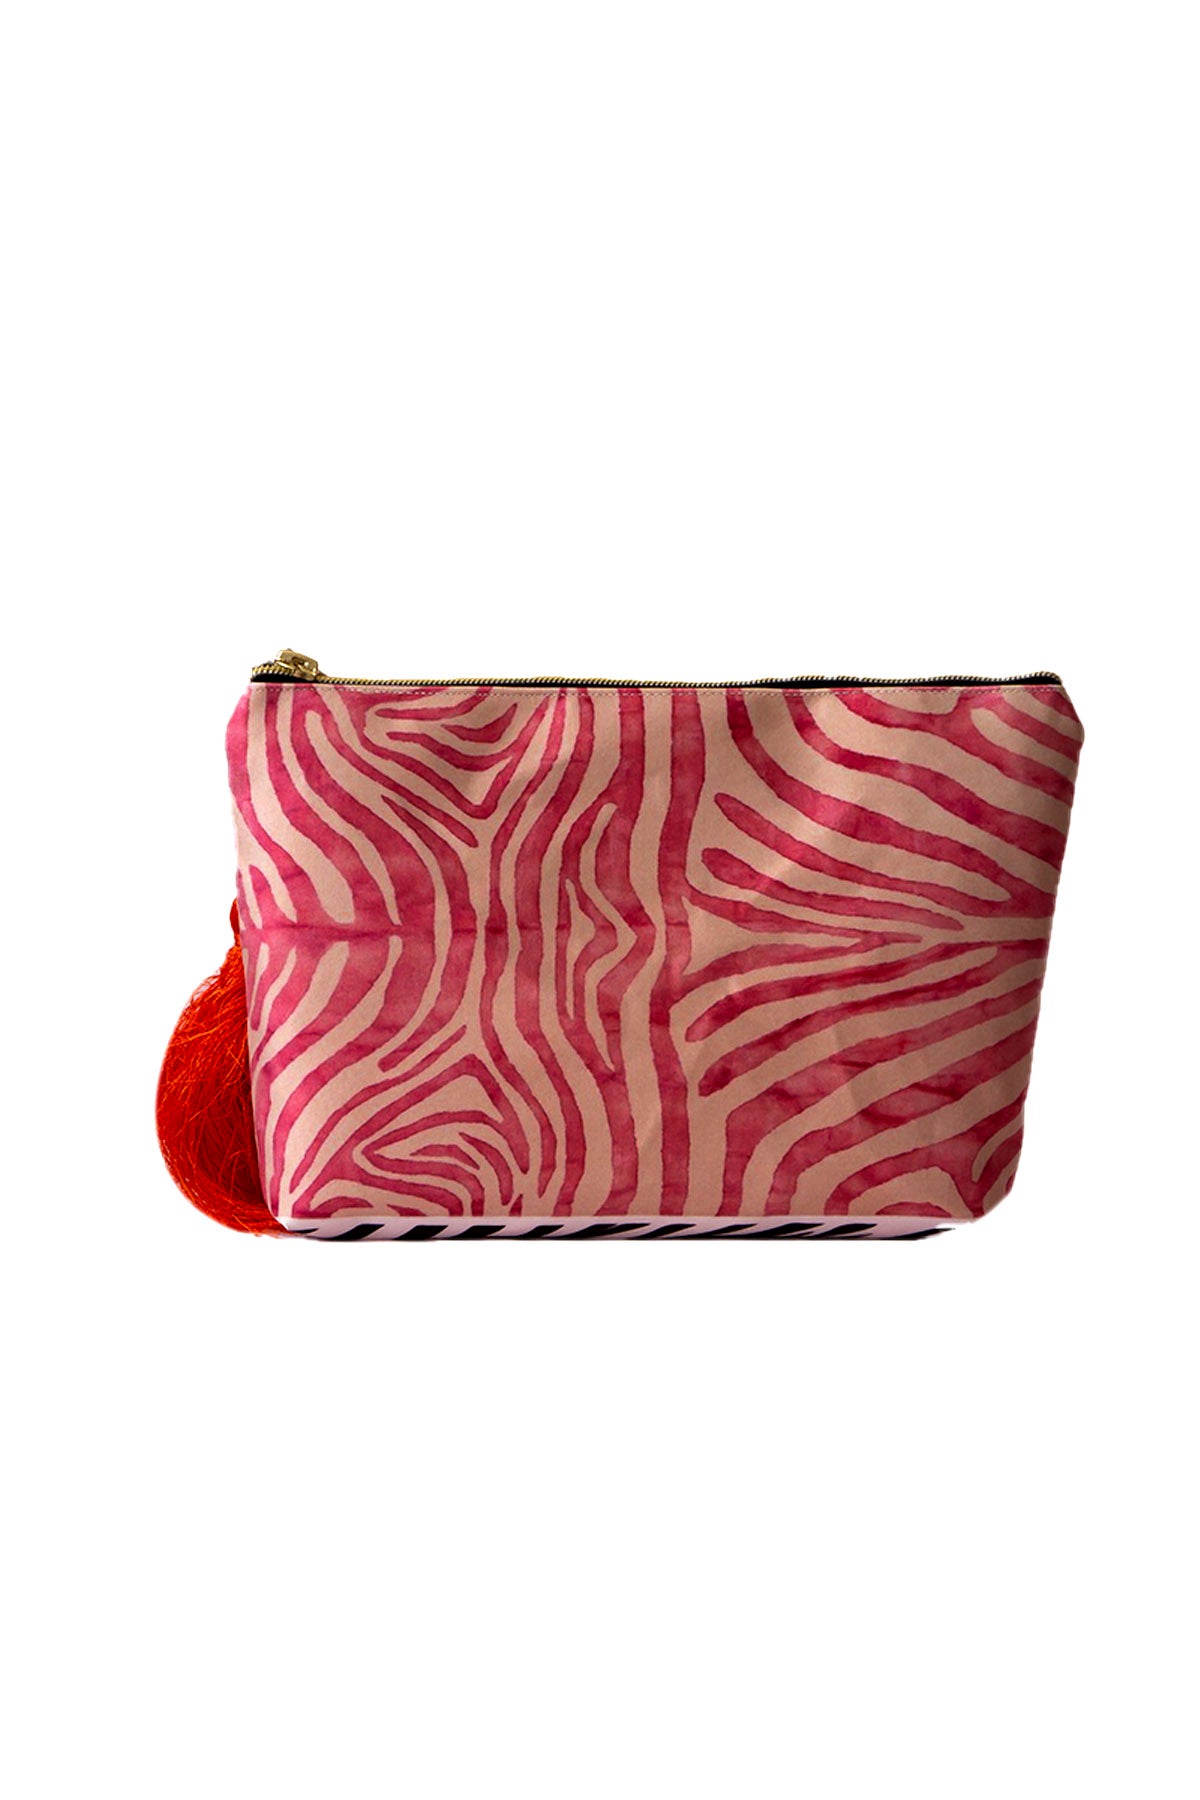 CLUTCH BAG WITH TIGER-PATTERN